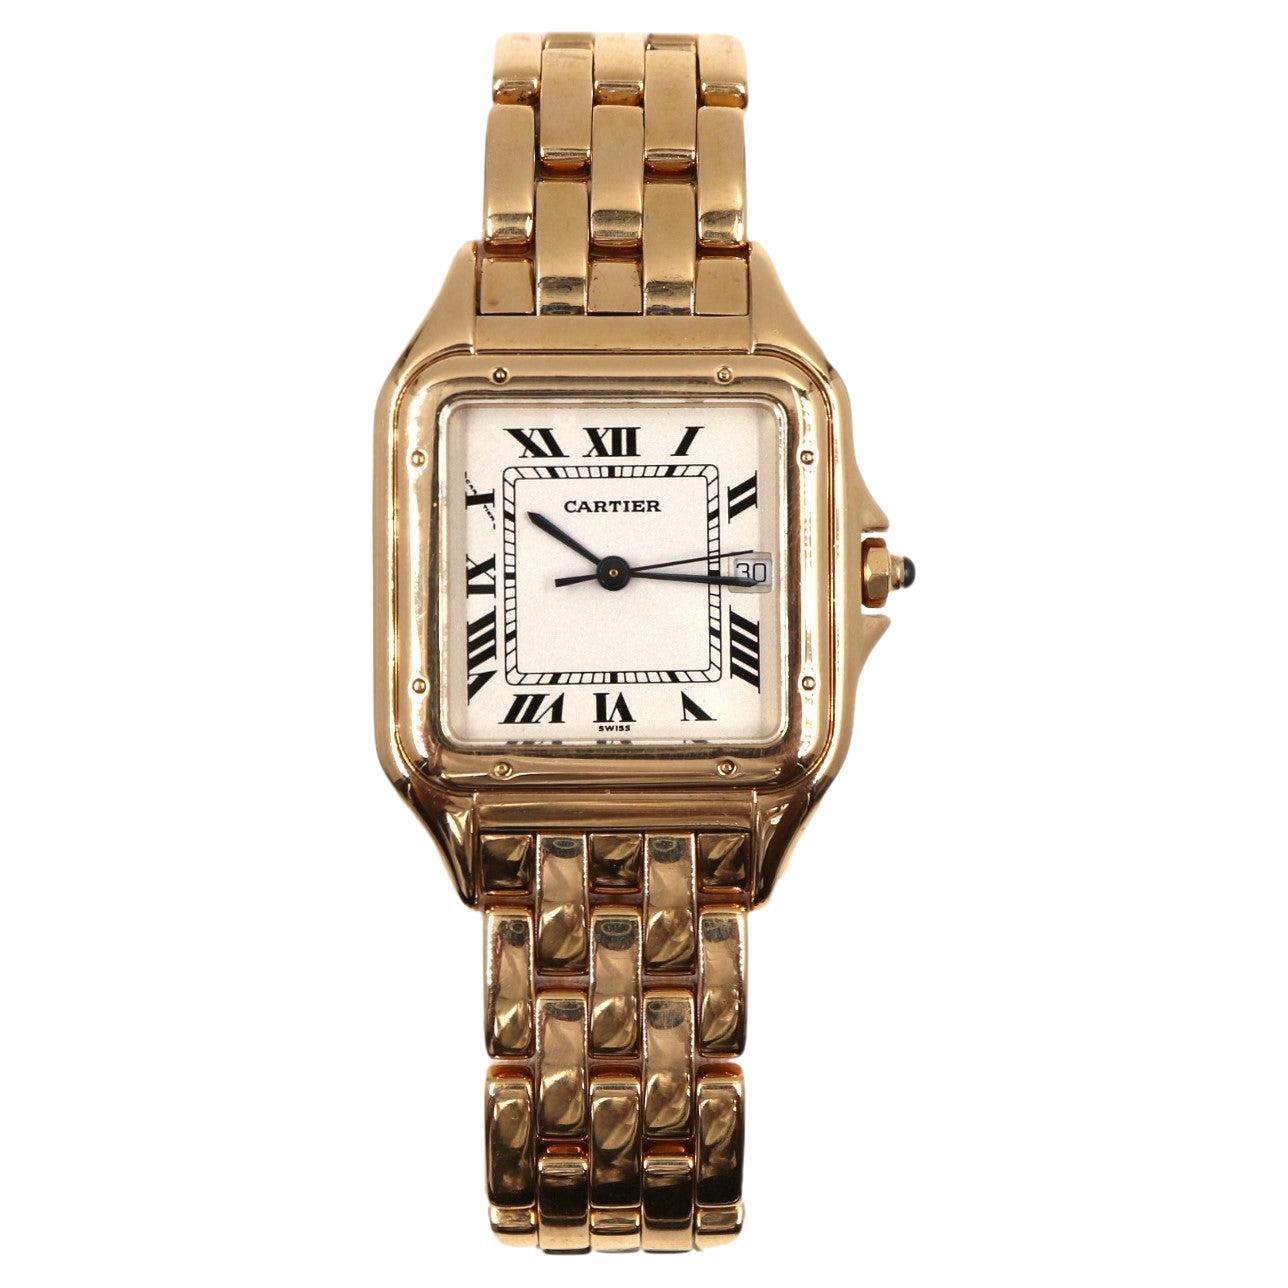 Bud Fox Wall Street Pre-Owned Coveted Cartier Große Panther-Uhr 18K Gold 27mm